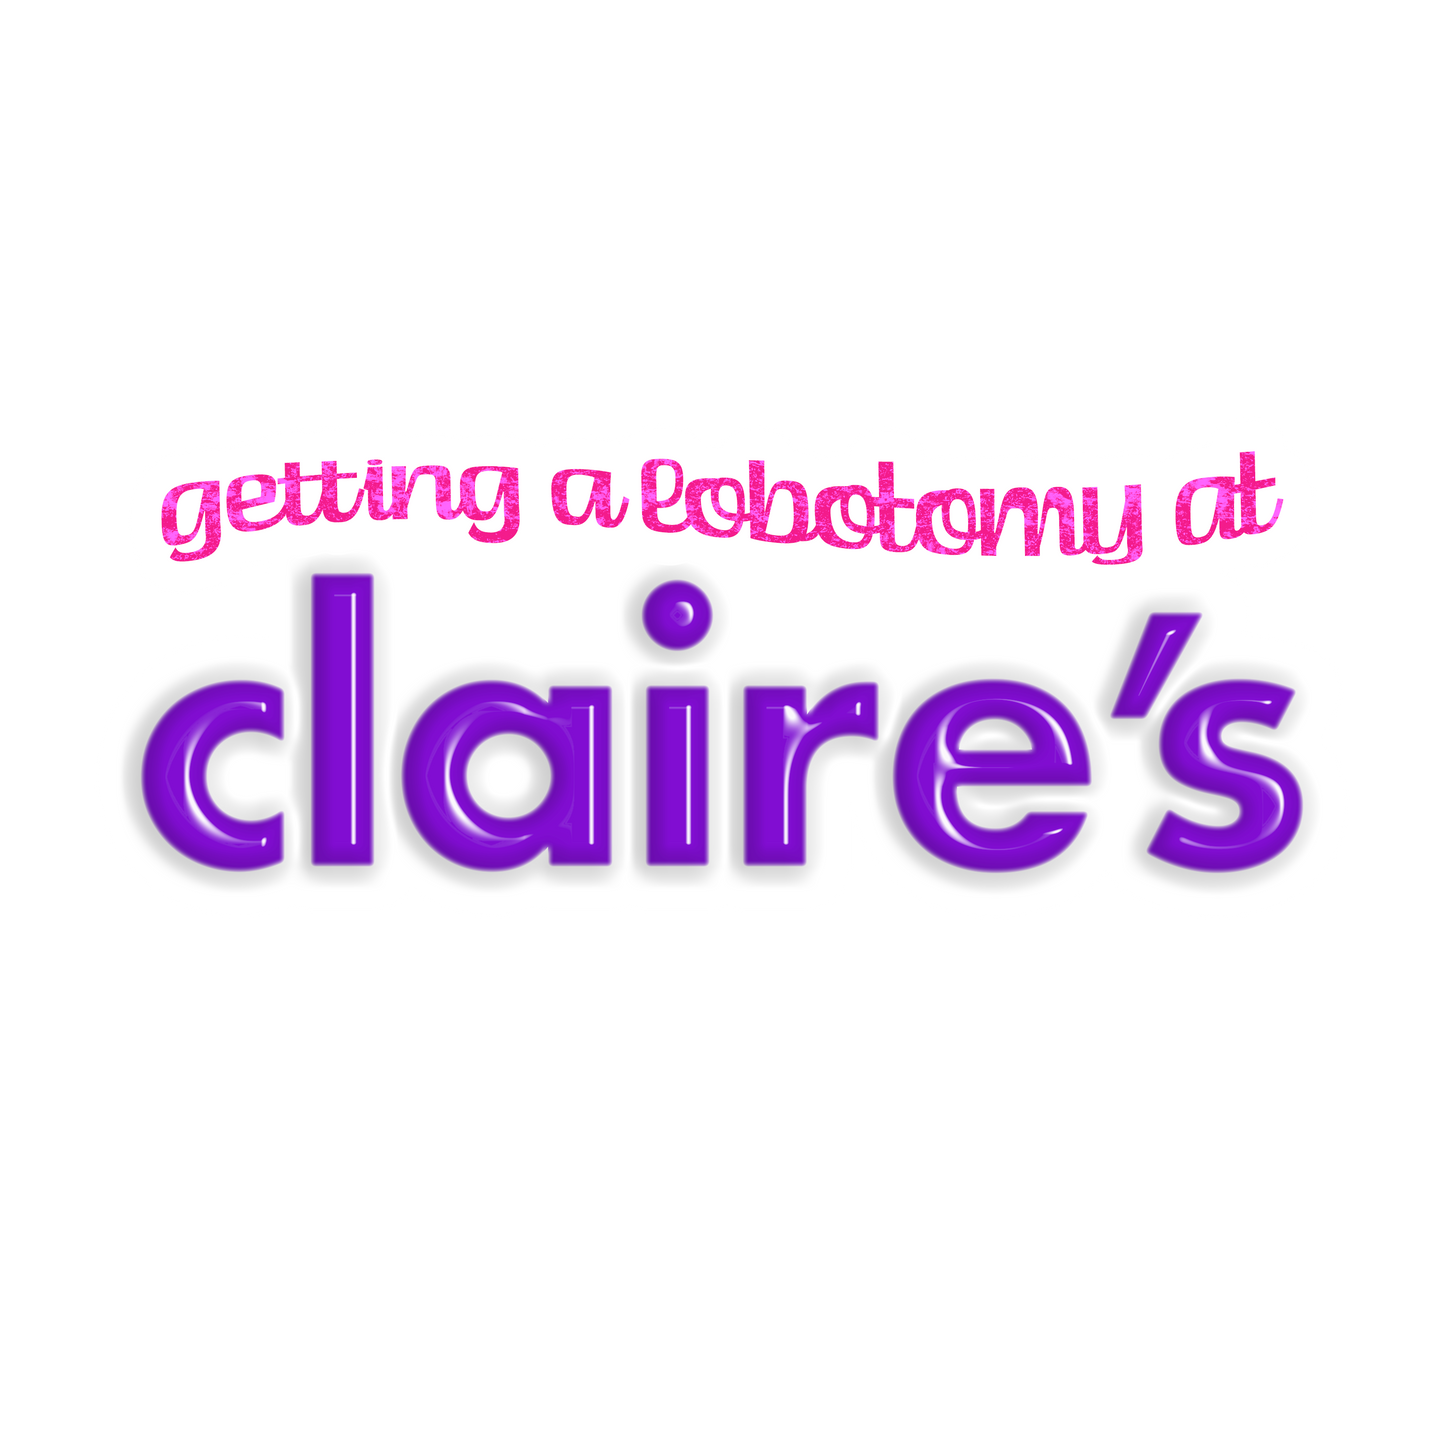 lobotomy at claire's sticker